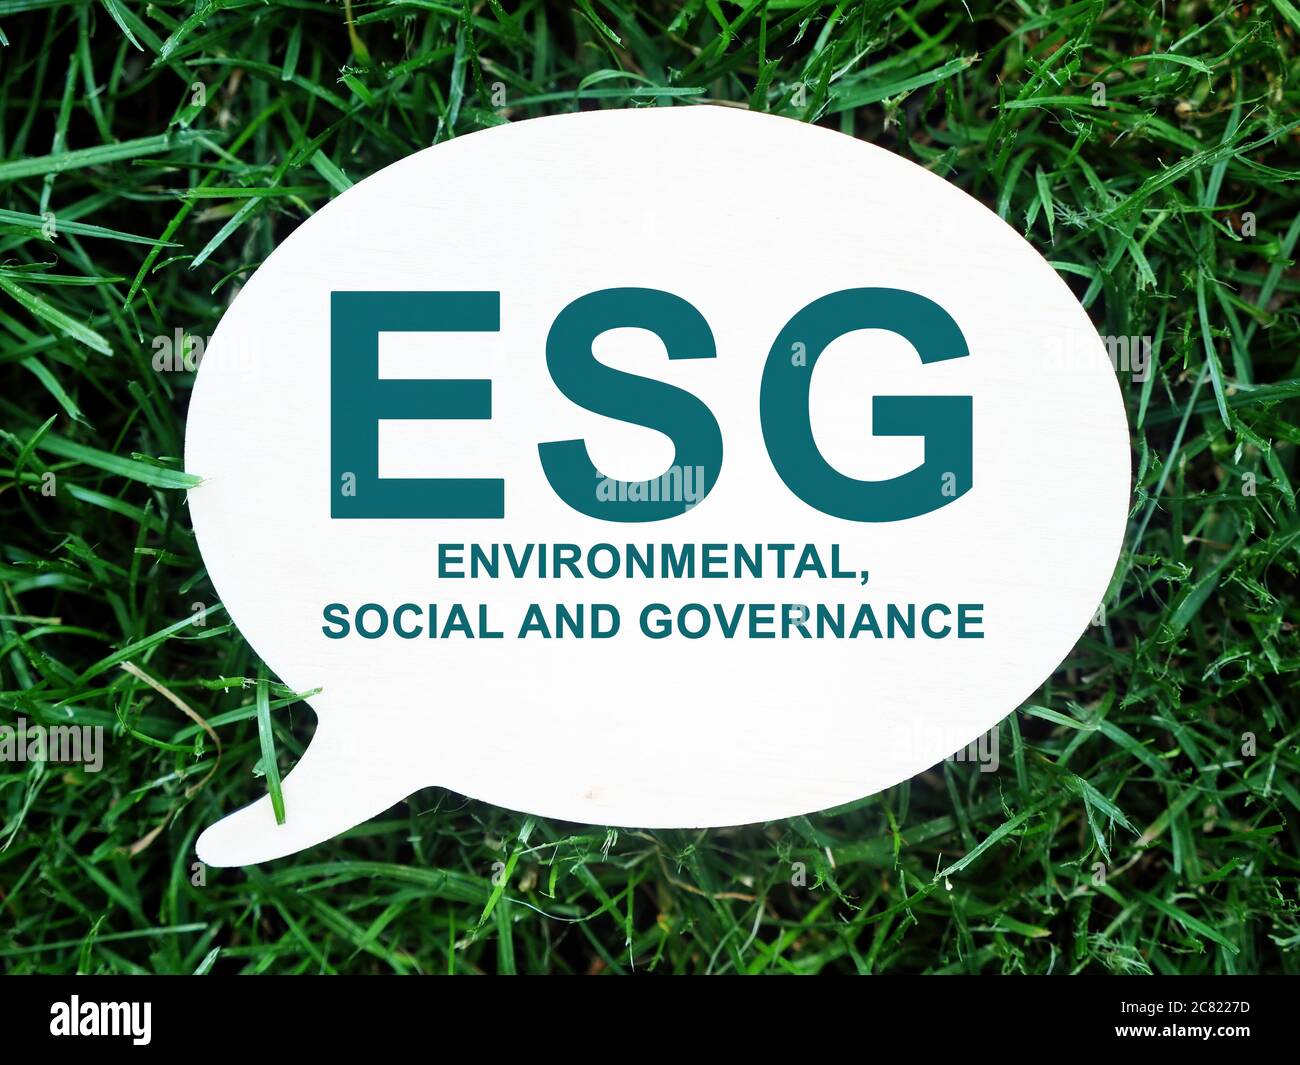 ESG Environmental, Social and Governance sign on the plate. Stock Photo